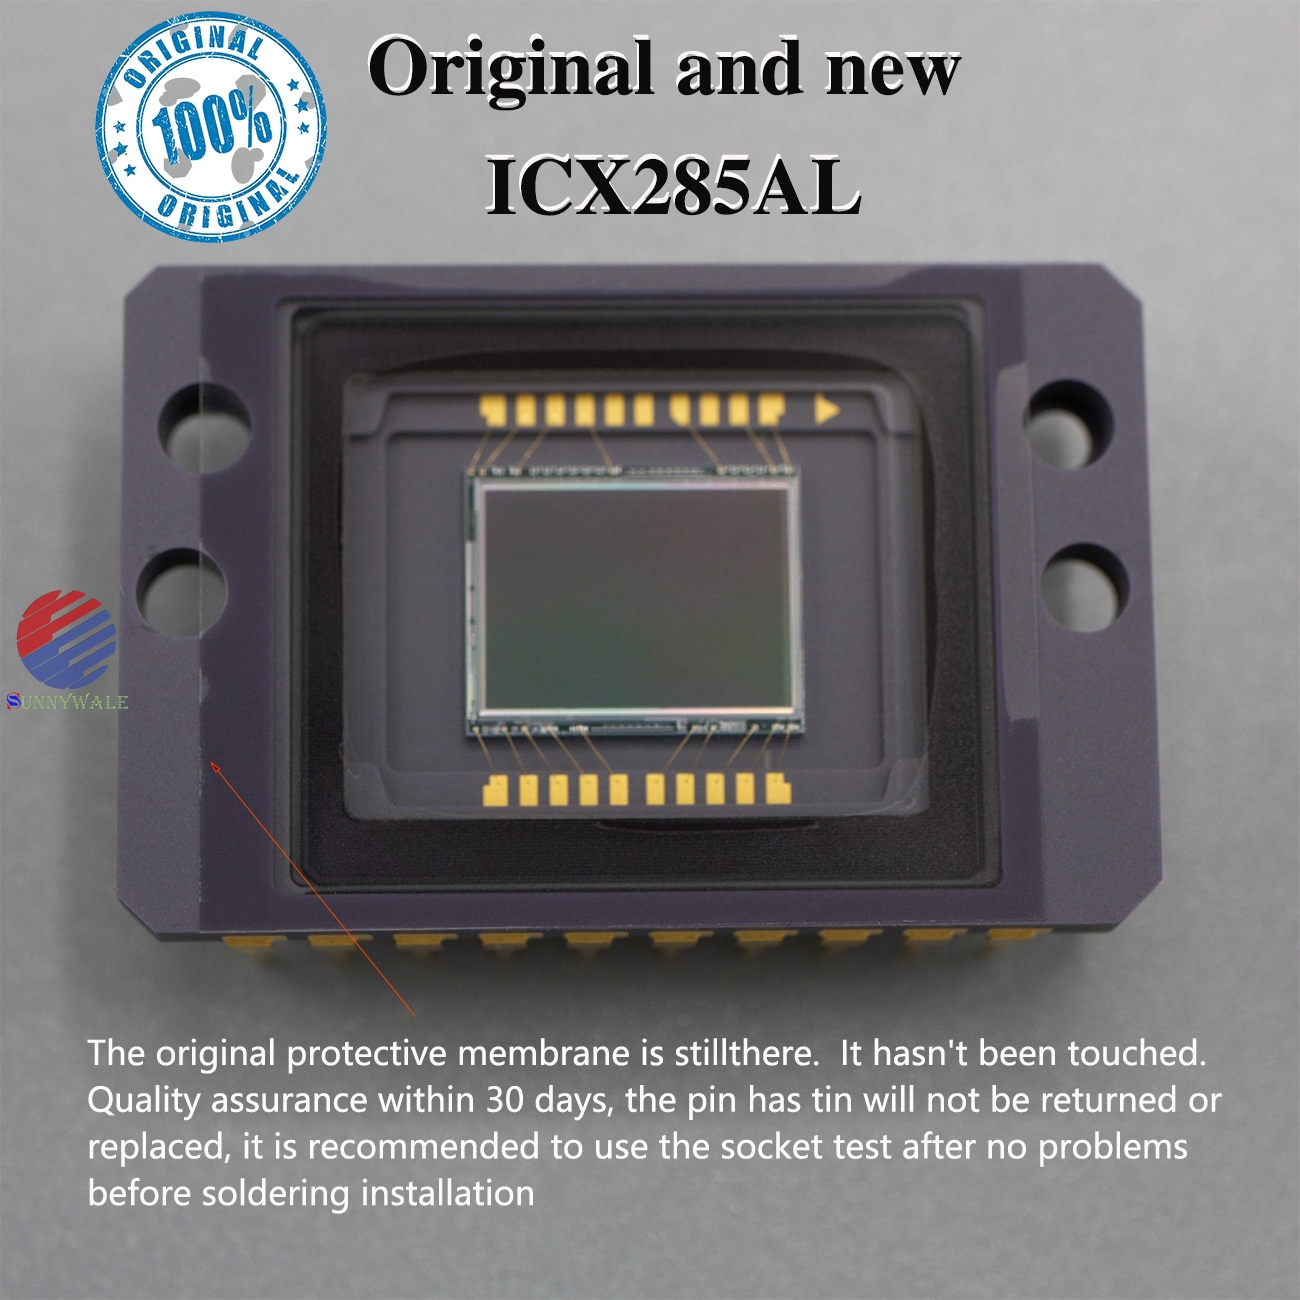 ICX285AL, SONY 2/3 CCD, SONY 4:3 sensor, Industrial camera CCD, High Speed Camera sensor, Industrial camera CCD, high frame rate CCD, high sampling rate image sensor, high resolution analog output CCD, 1.5 megapixel CCD, high resolution CCD, high-end industrial camera sensor, Black and white CCD, monochrome CCD, black and white industrial camera CCD, SONY black and white photosensitive chip, large size large pixel CCD